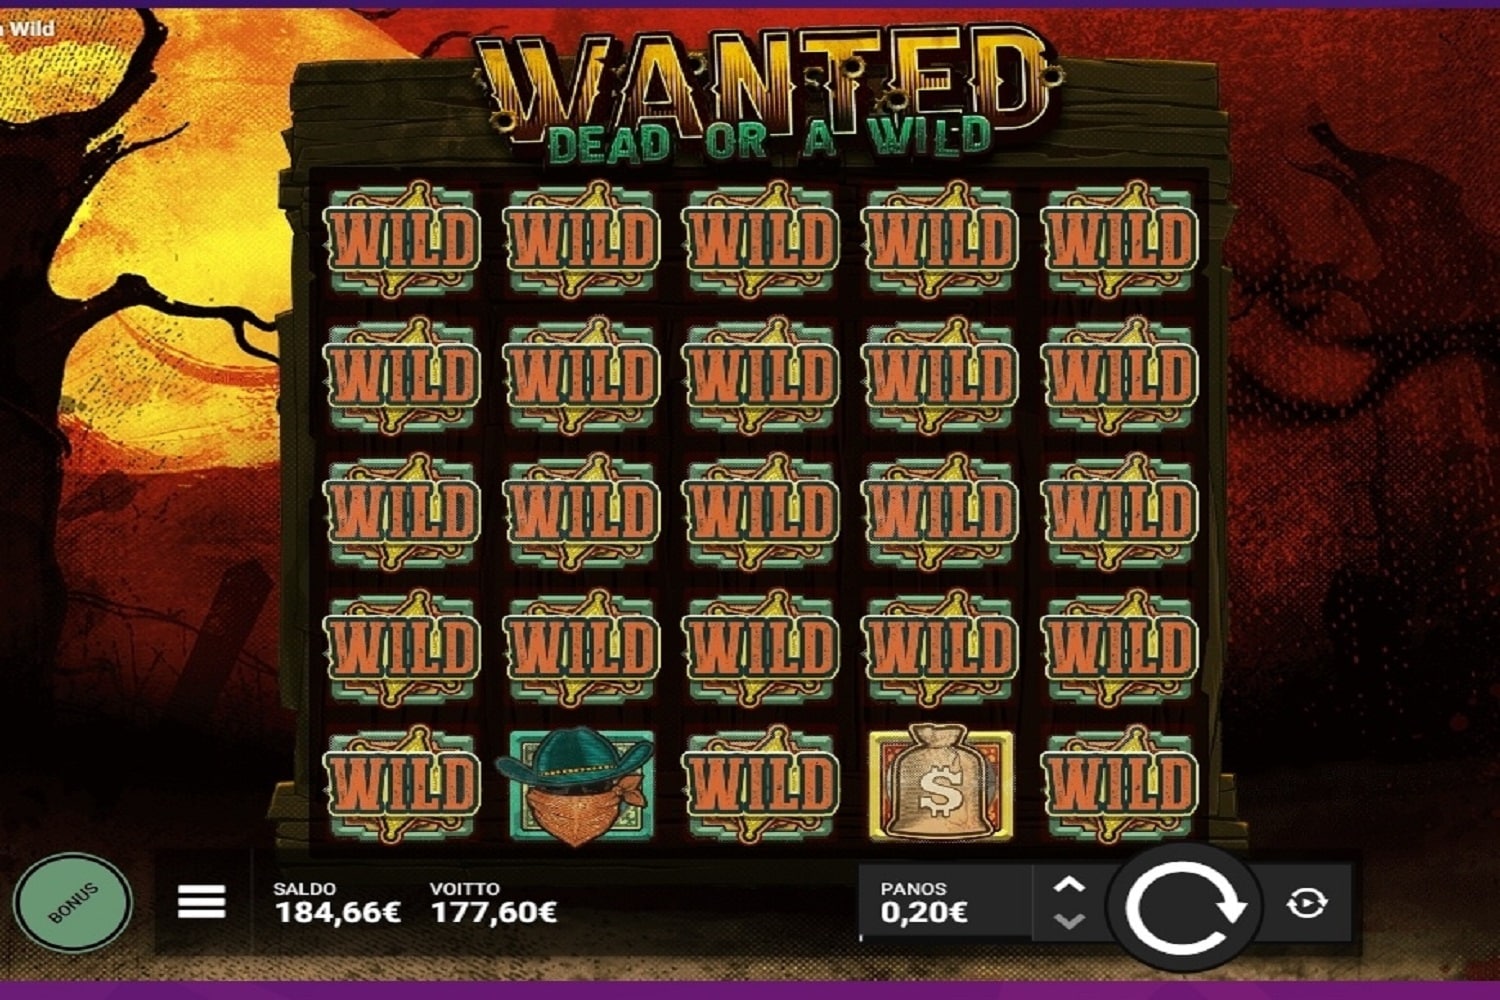 Wanted Dead or a Wild Casino win picture by helinaraider 177.60€ 888x 5.12.2022